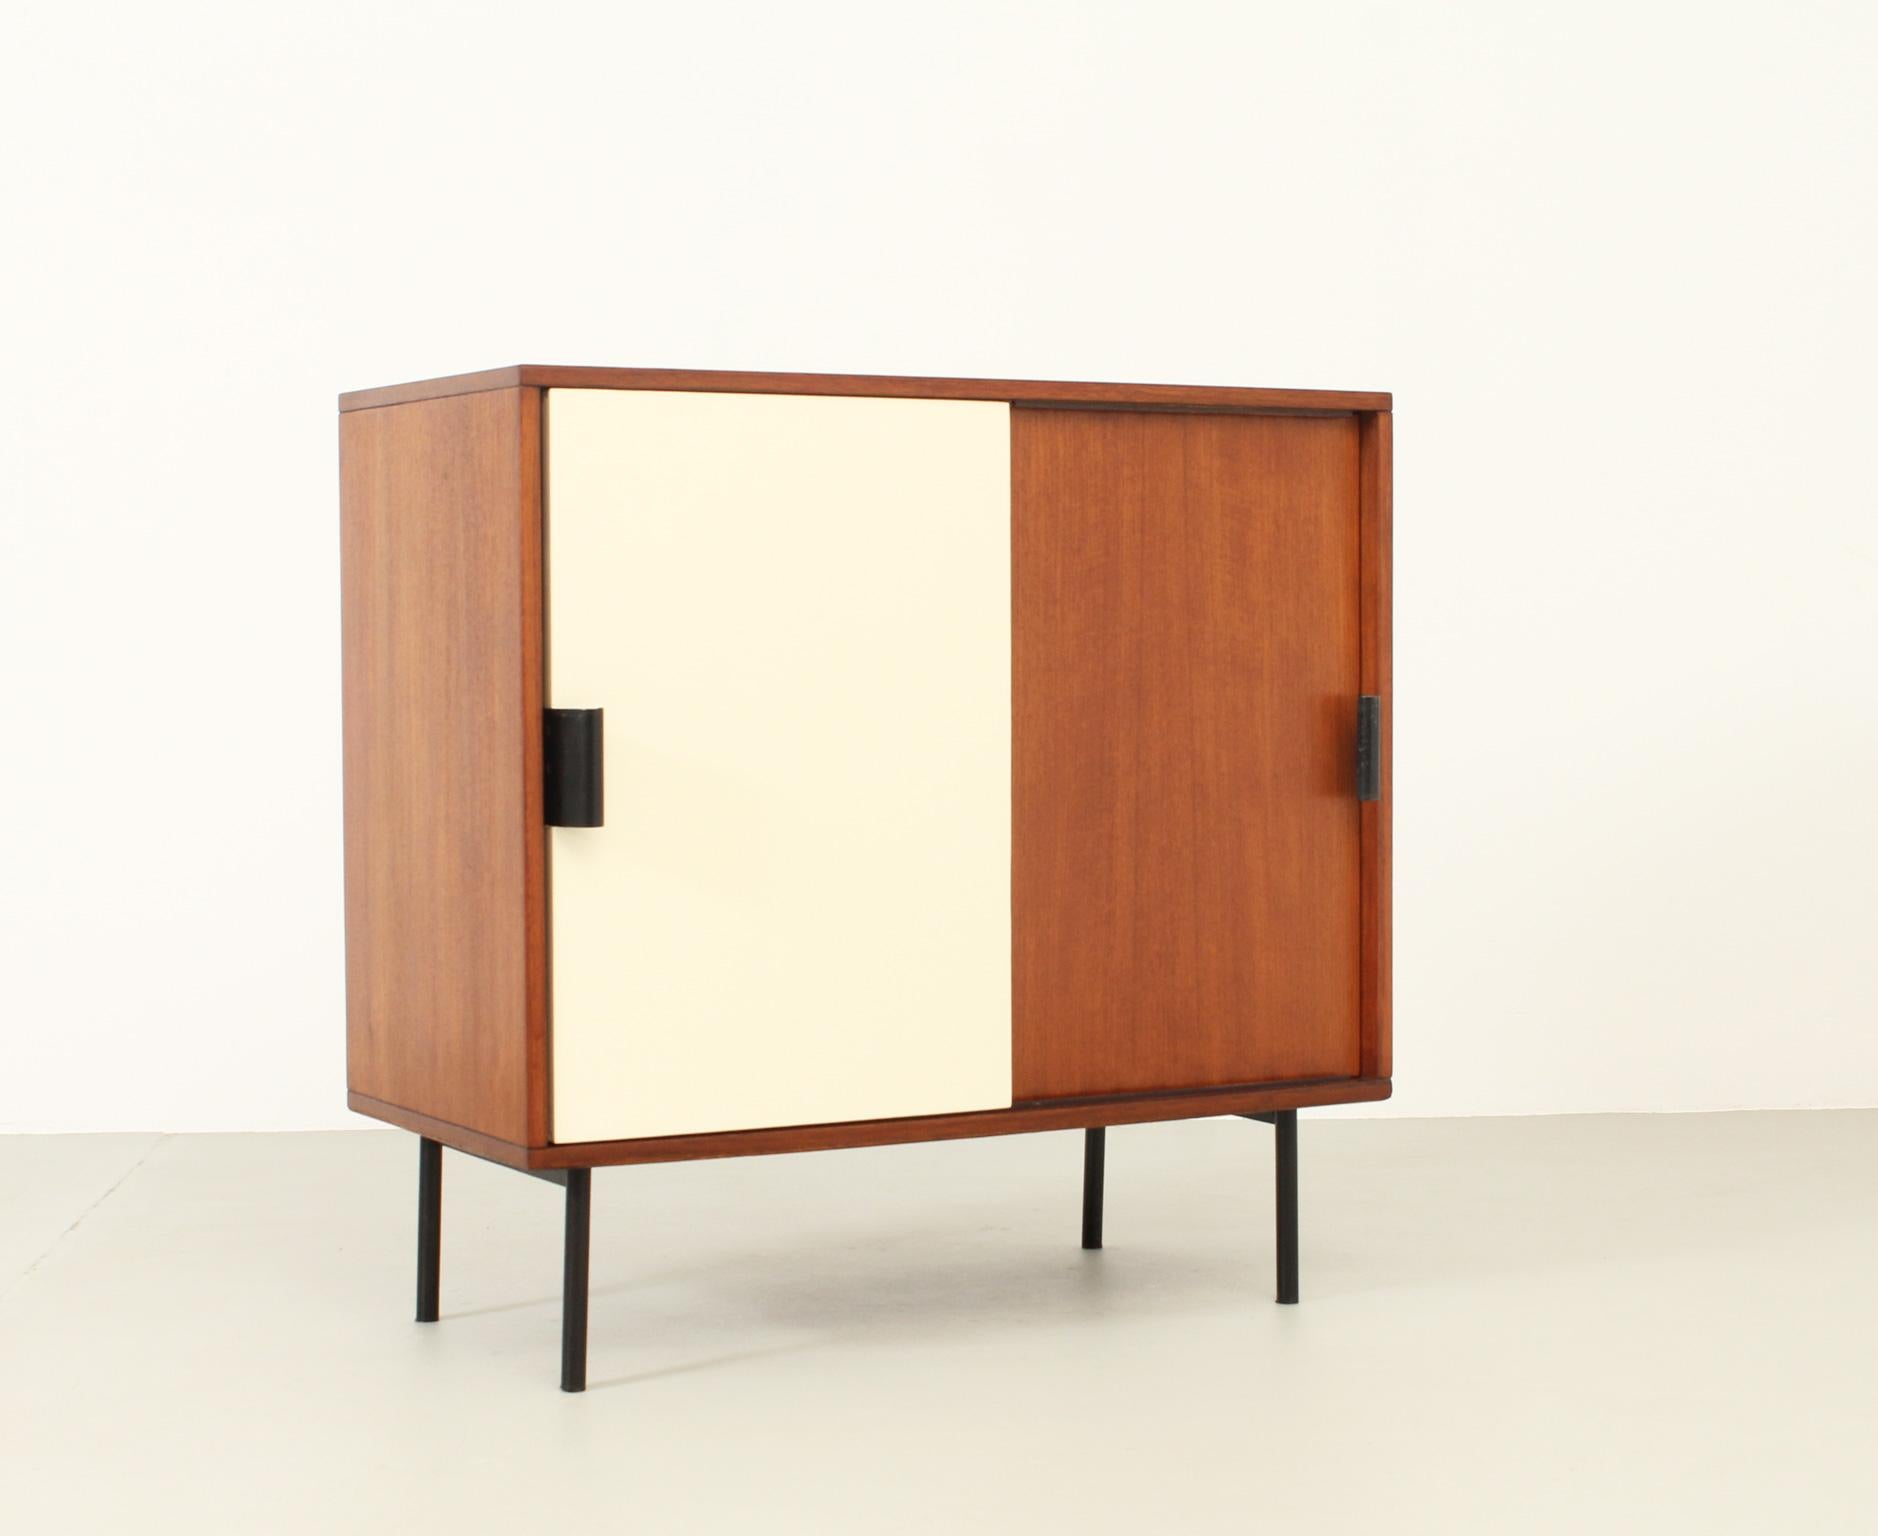 Cabinet designed in 1950's by the Italian architect Leonardo Fiori and produced by Isa Bergamo, Italy. Teak and lacquered wood and black enamelled metal with sliding doors. Signed with Isa logo.